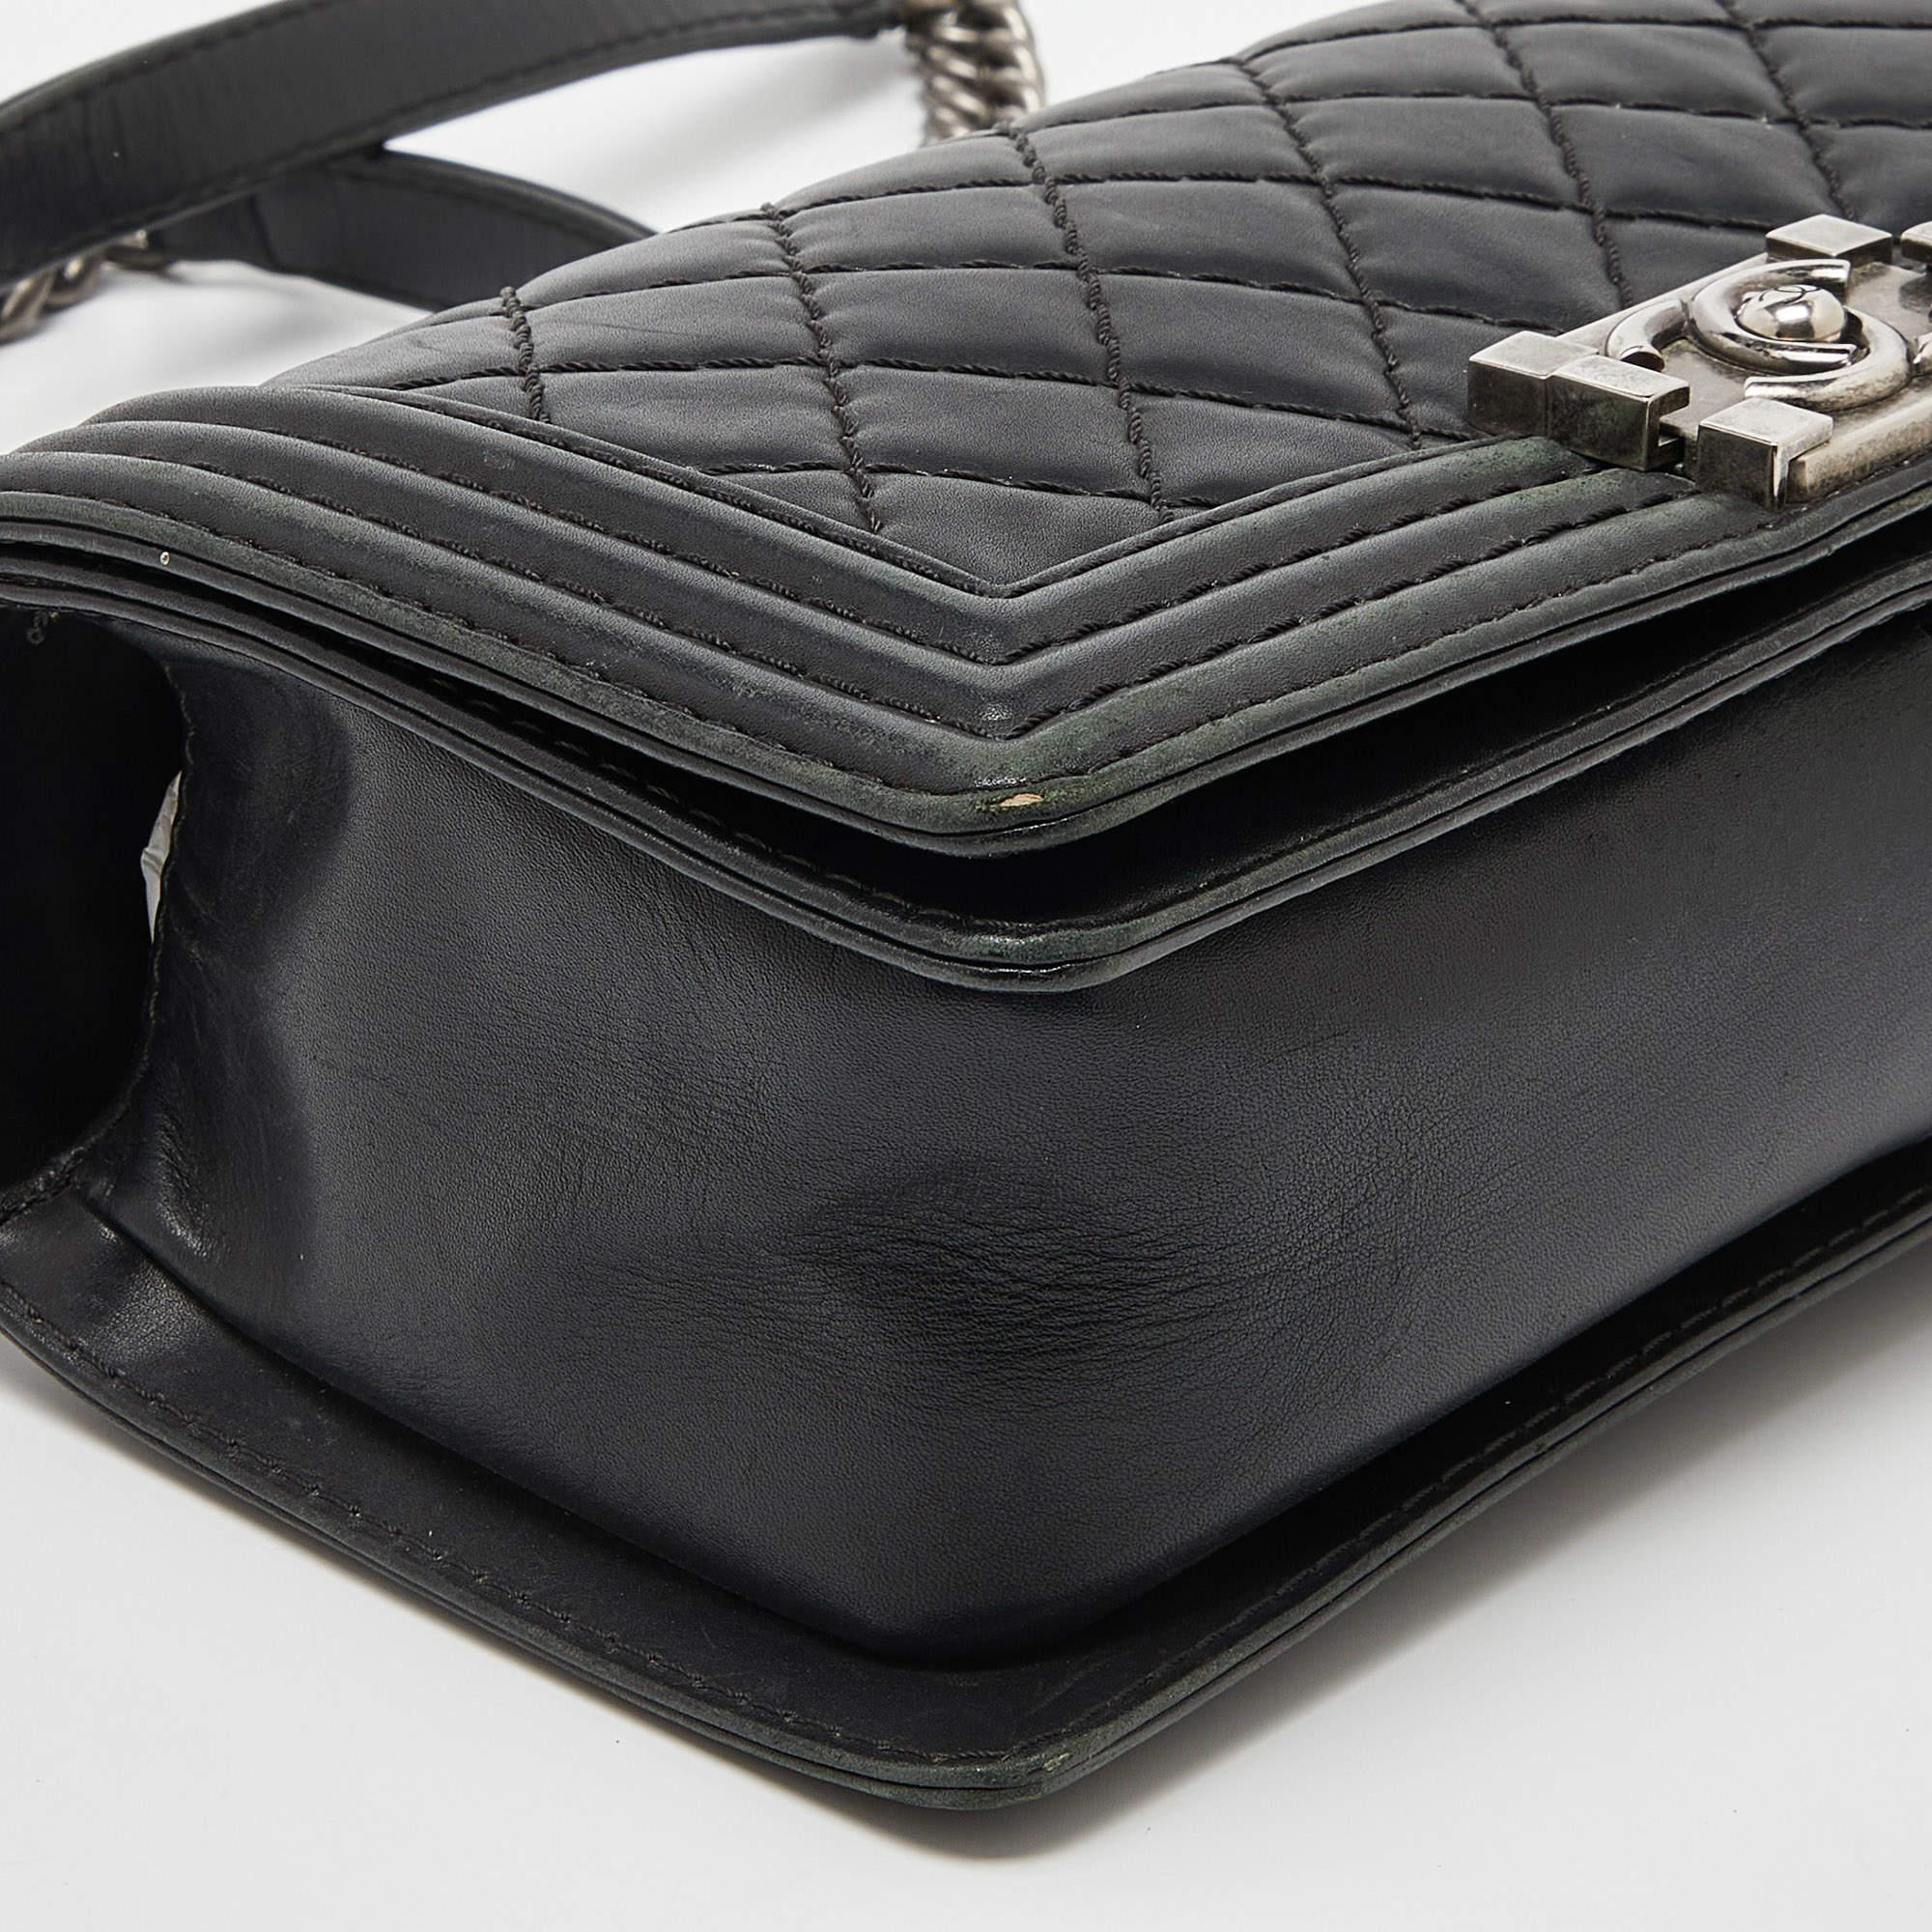 Chanel Black Quilted Wild Stitched Leather Medium Boy Bag 5